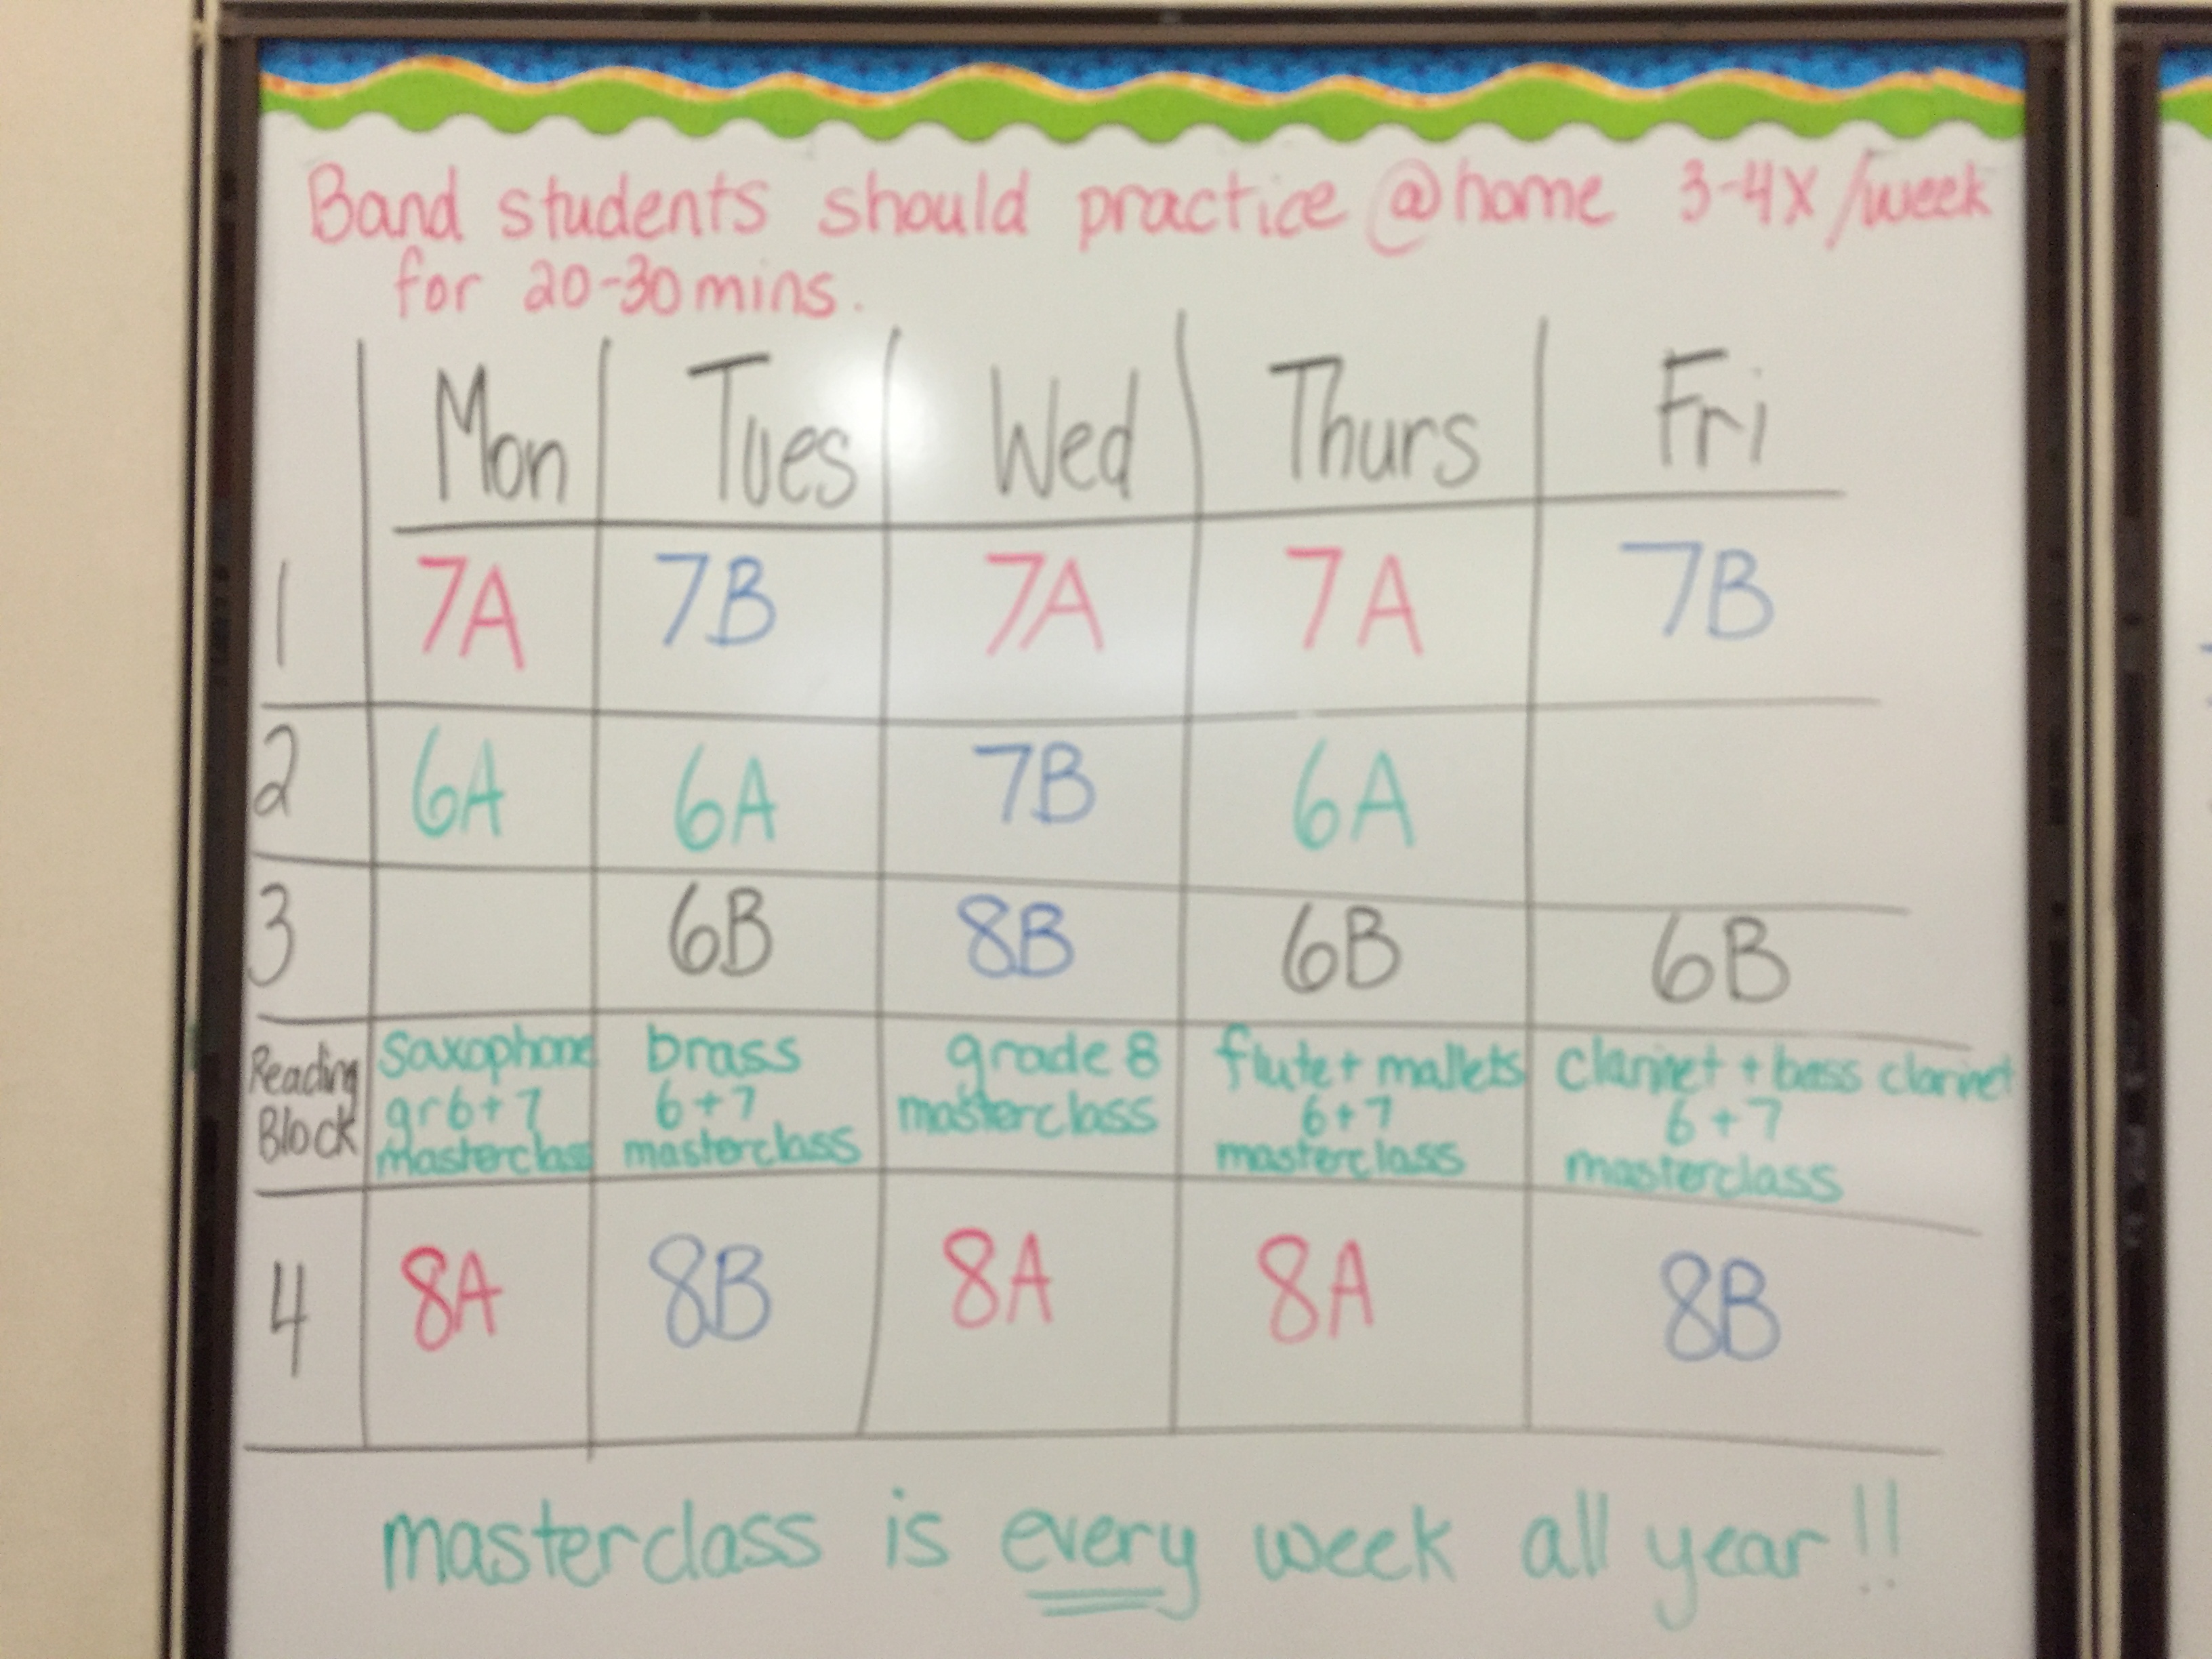 Students have band on alternating weeks with PE. Masterclass takes place EVERY week of the school year.